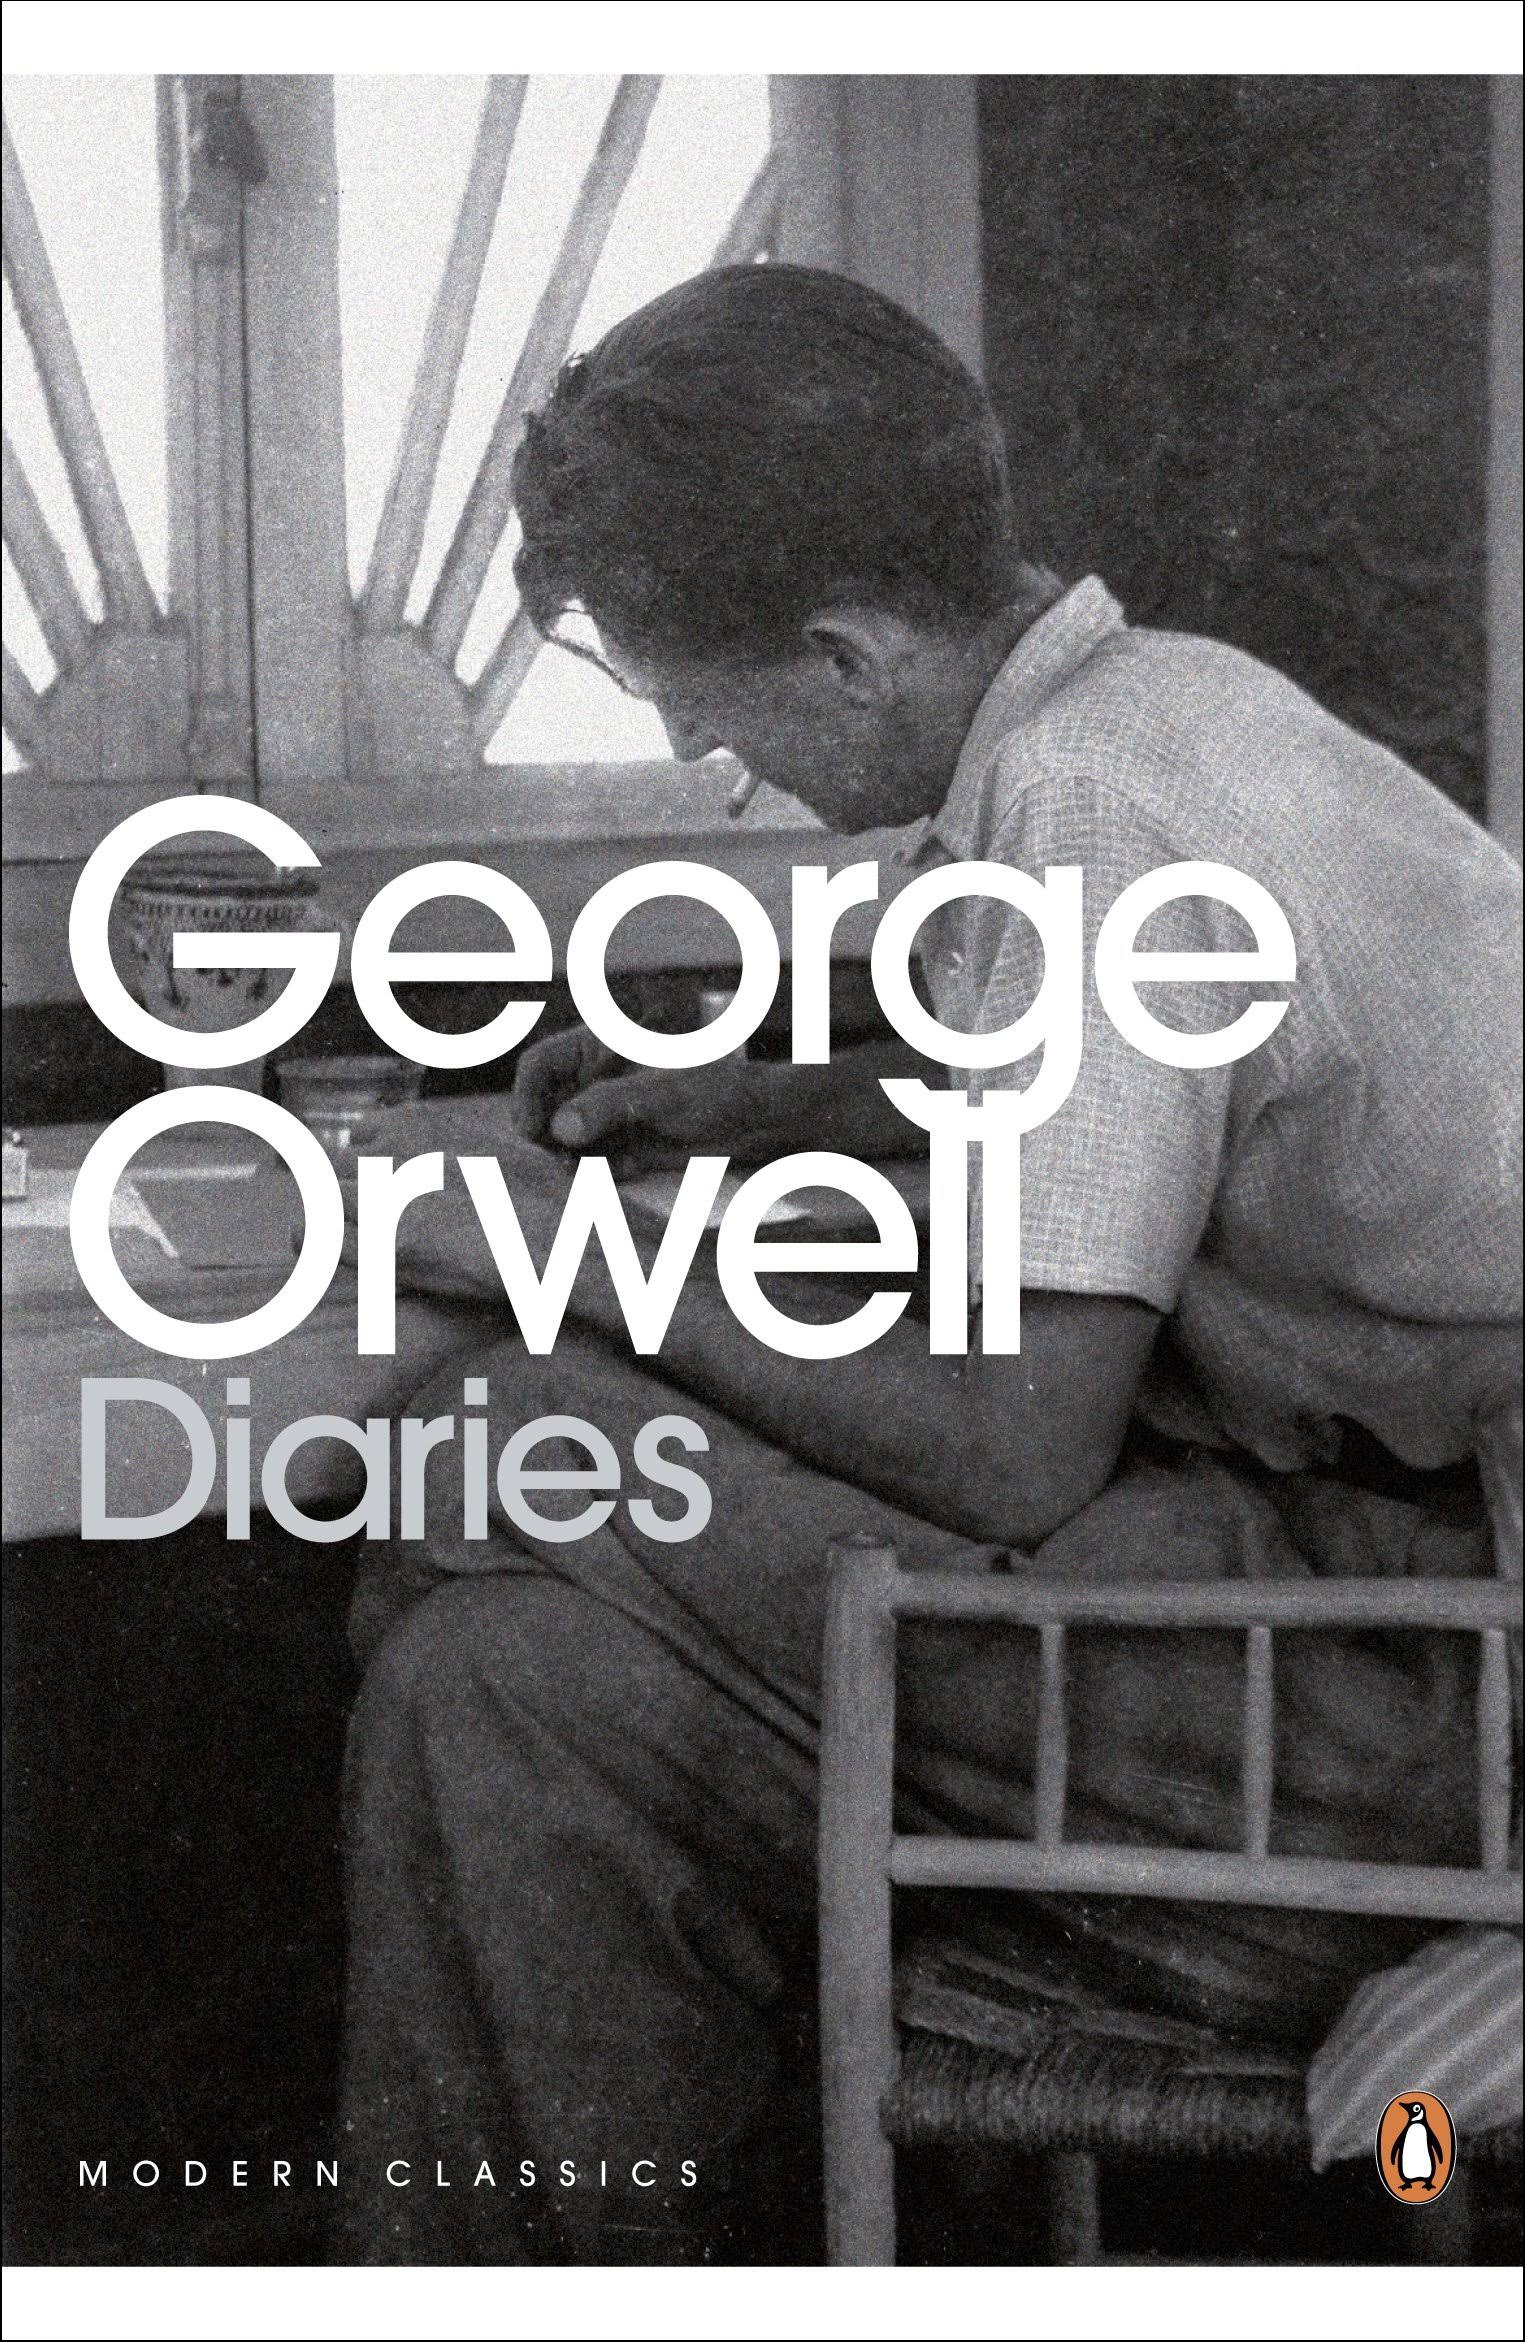 The Orwell Diaries [Book]